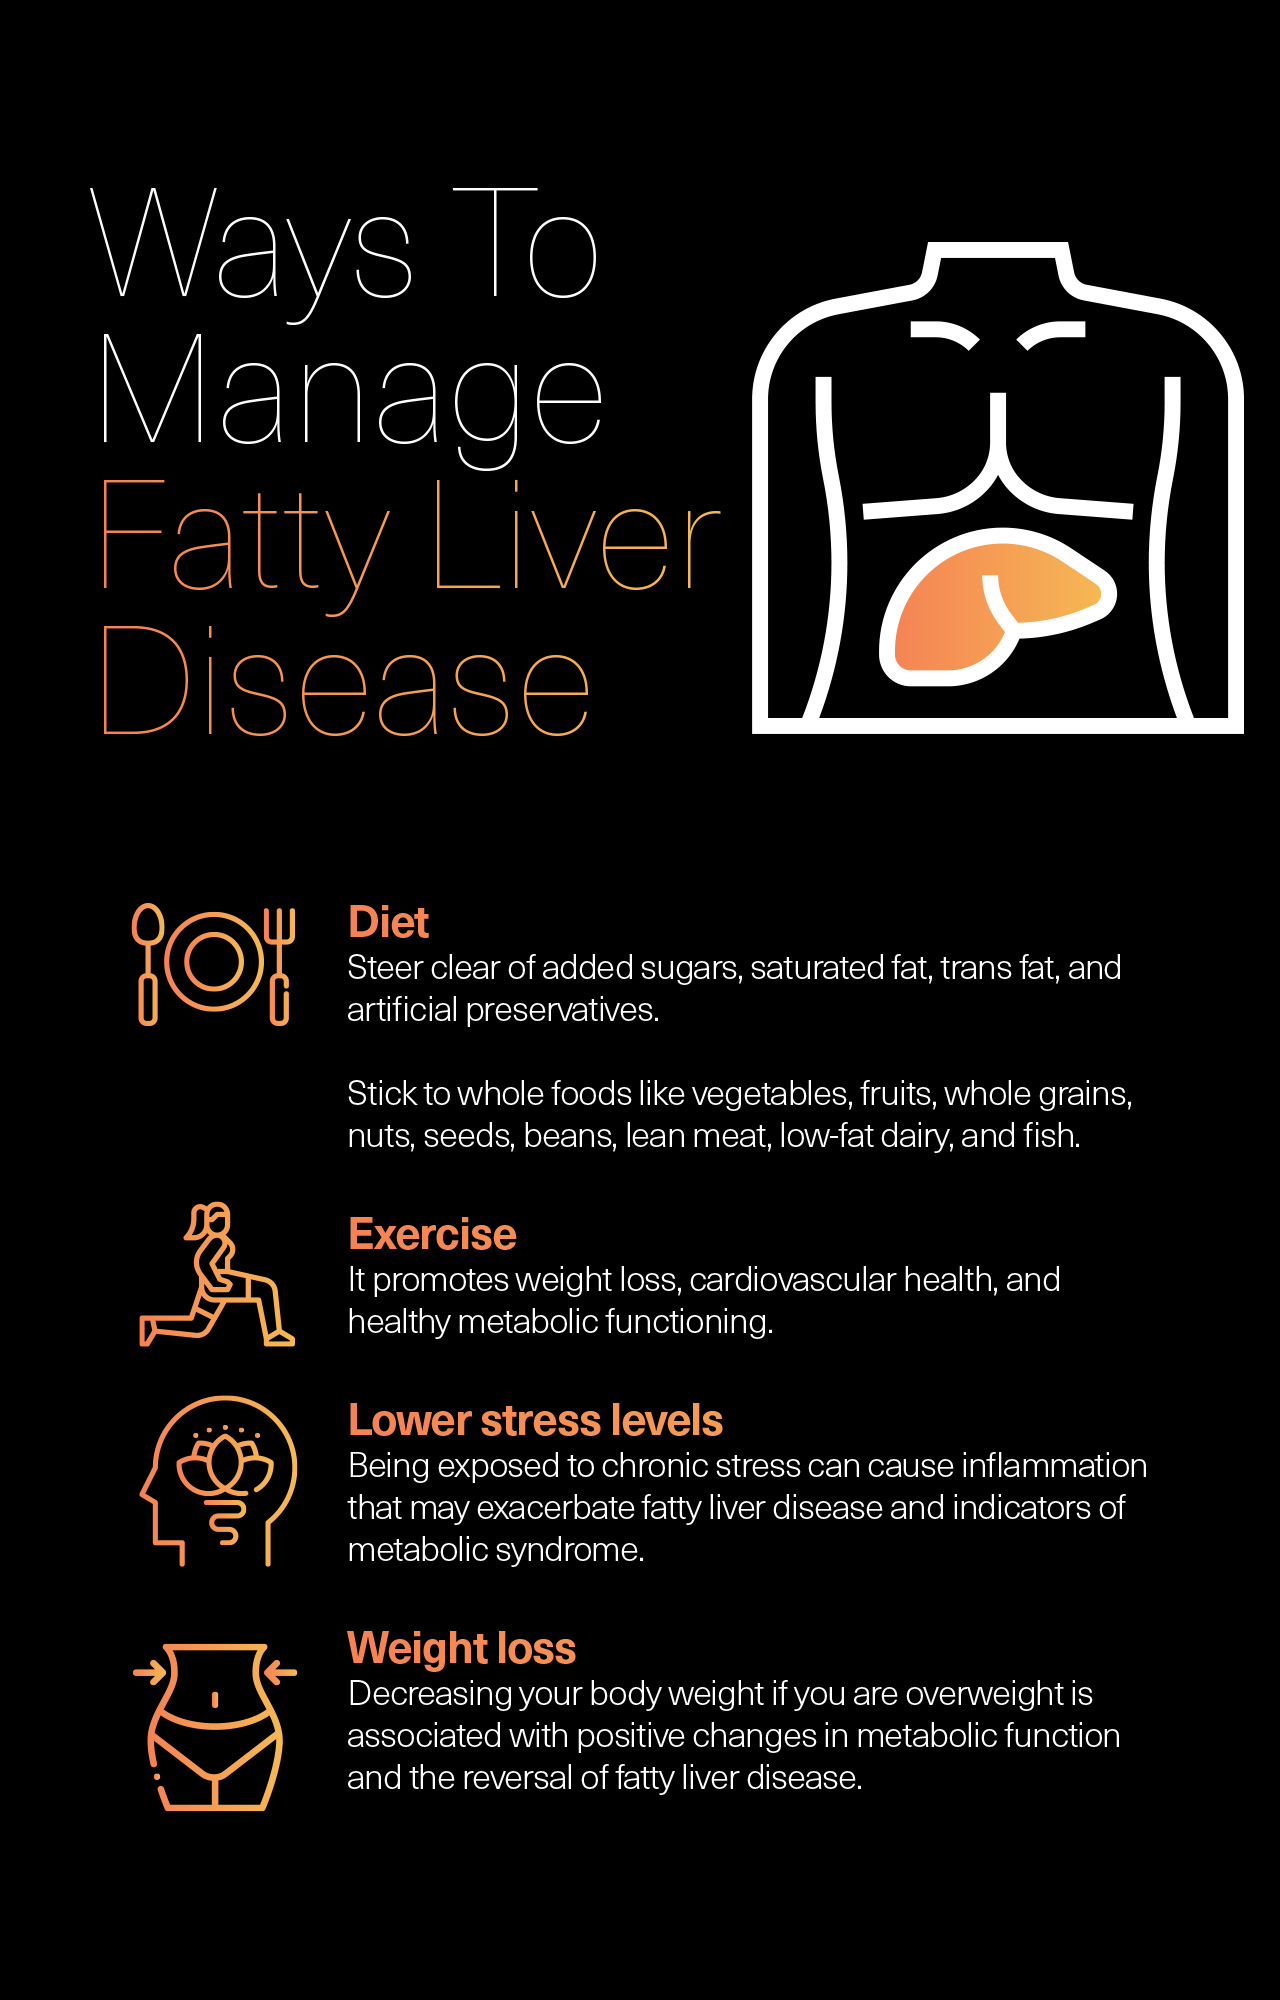 Ways To Manage Fatty Liver Disease